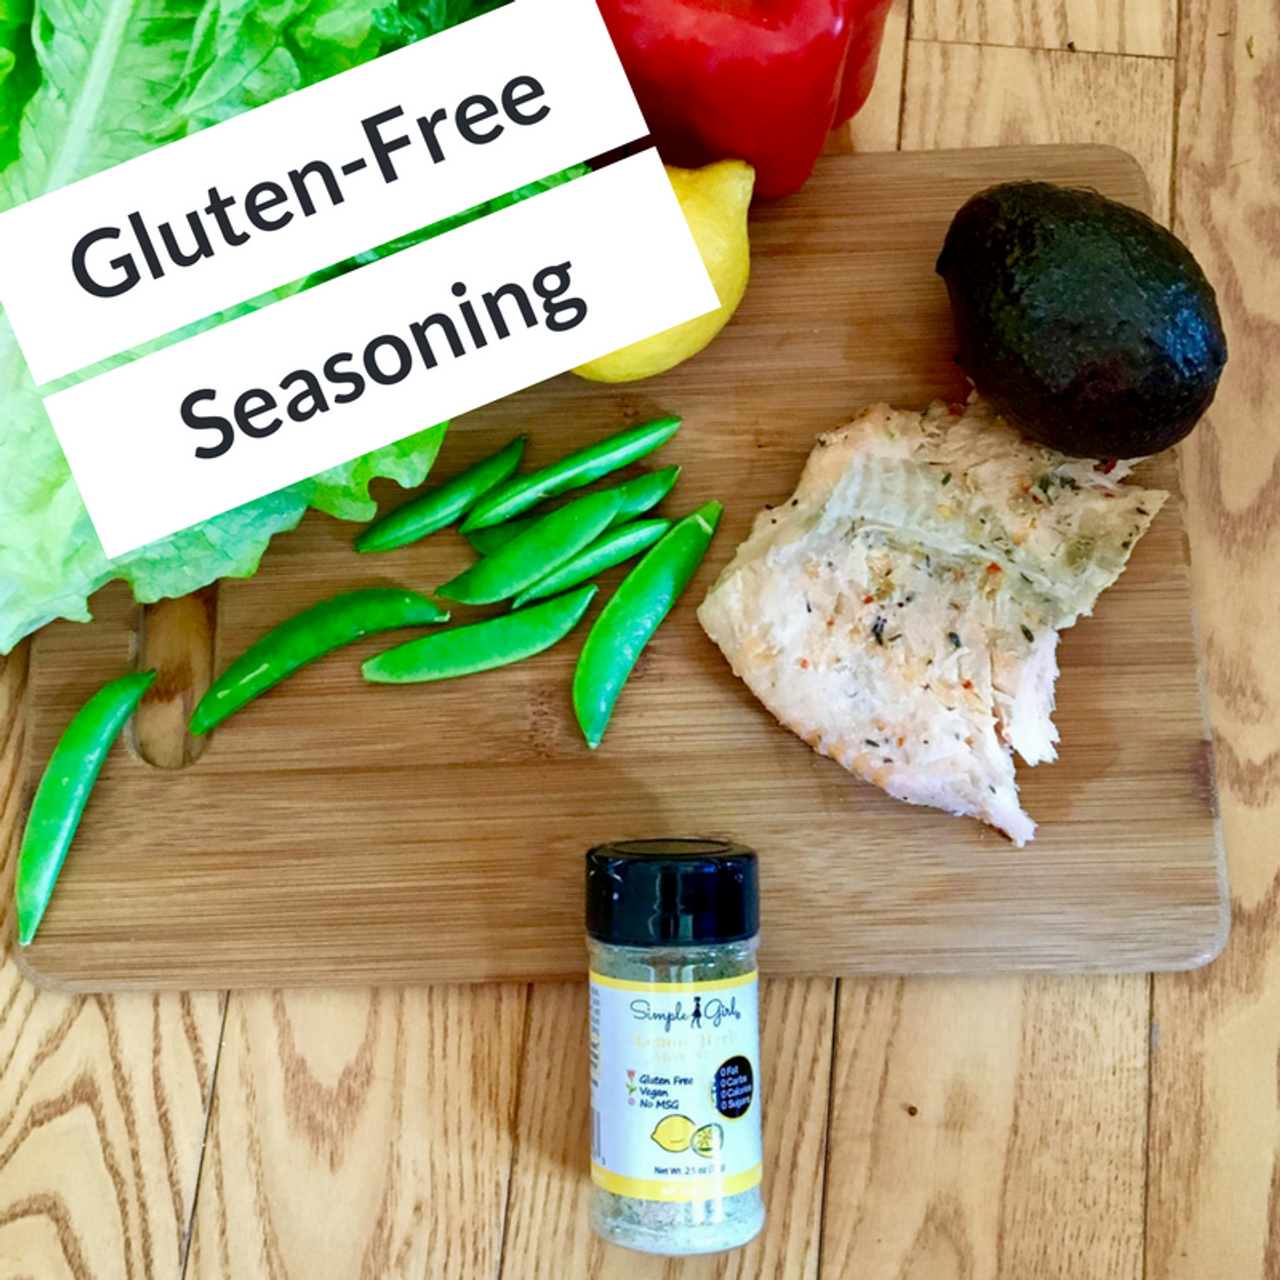 Which Spices, Seasonings and Herbs are Gluten-Free?